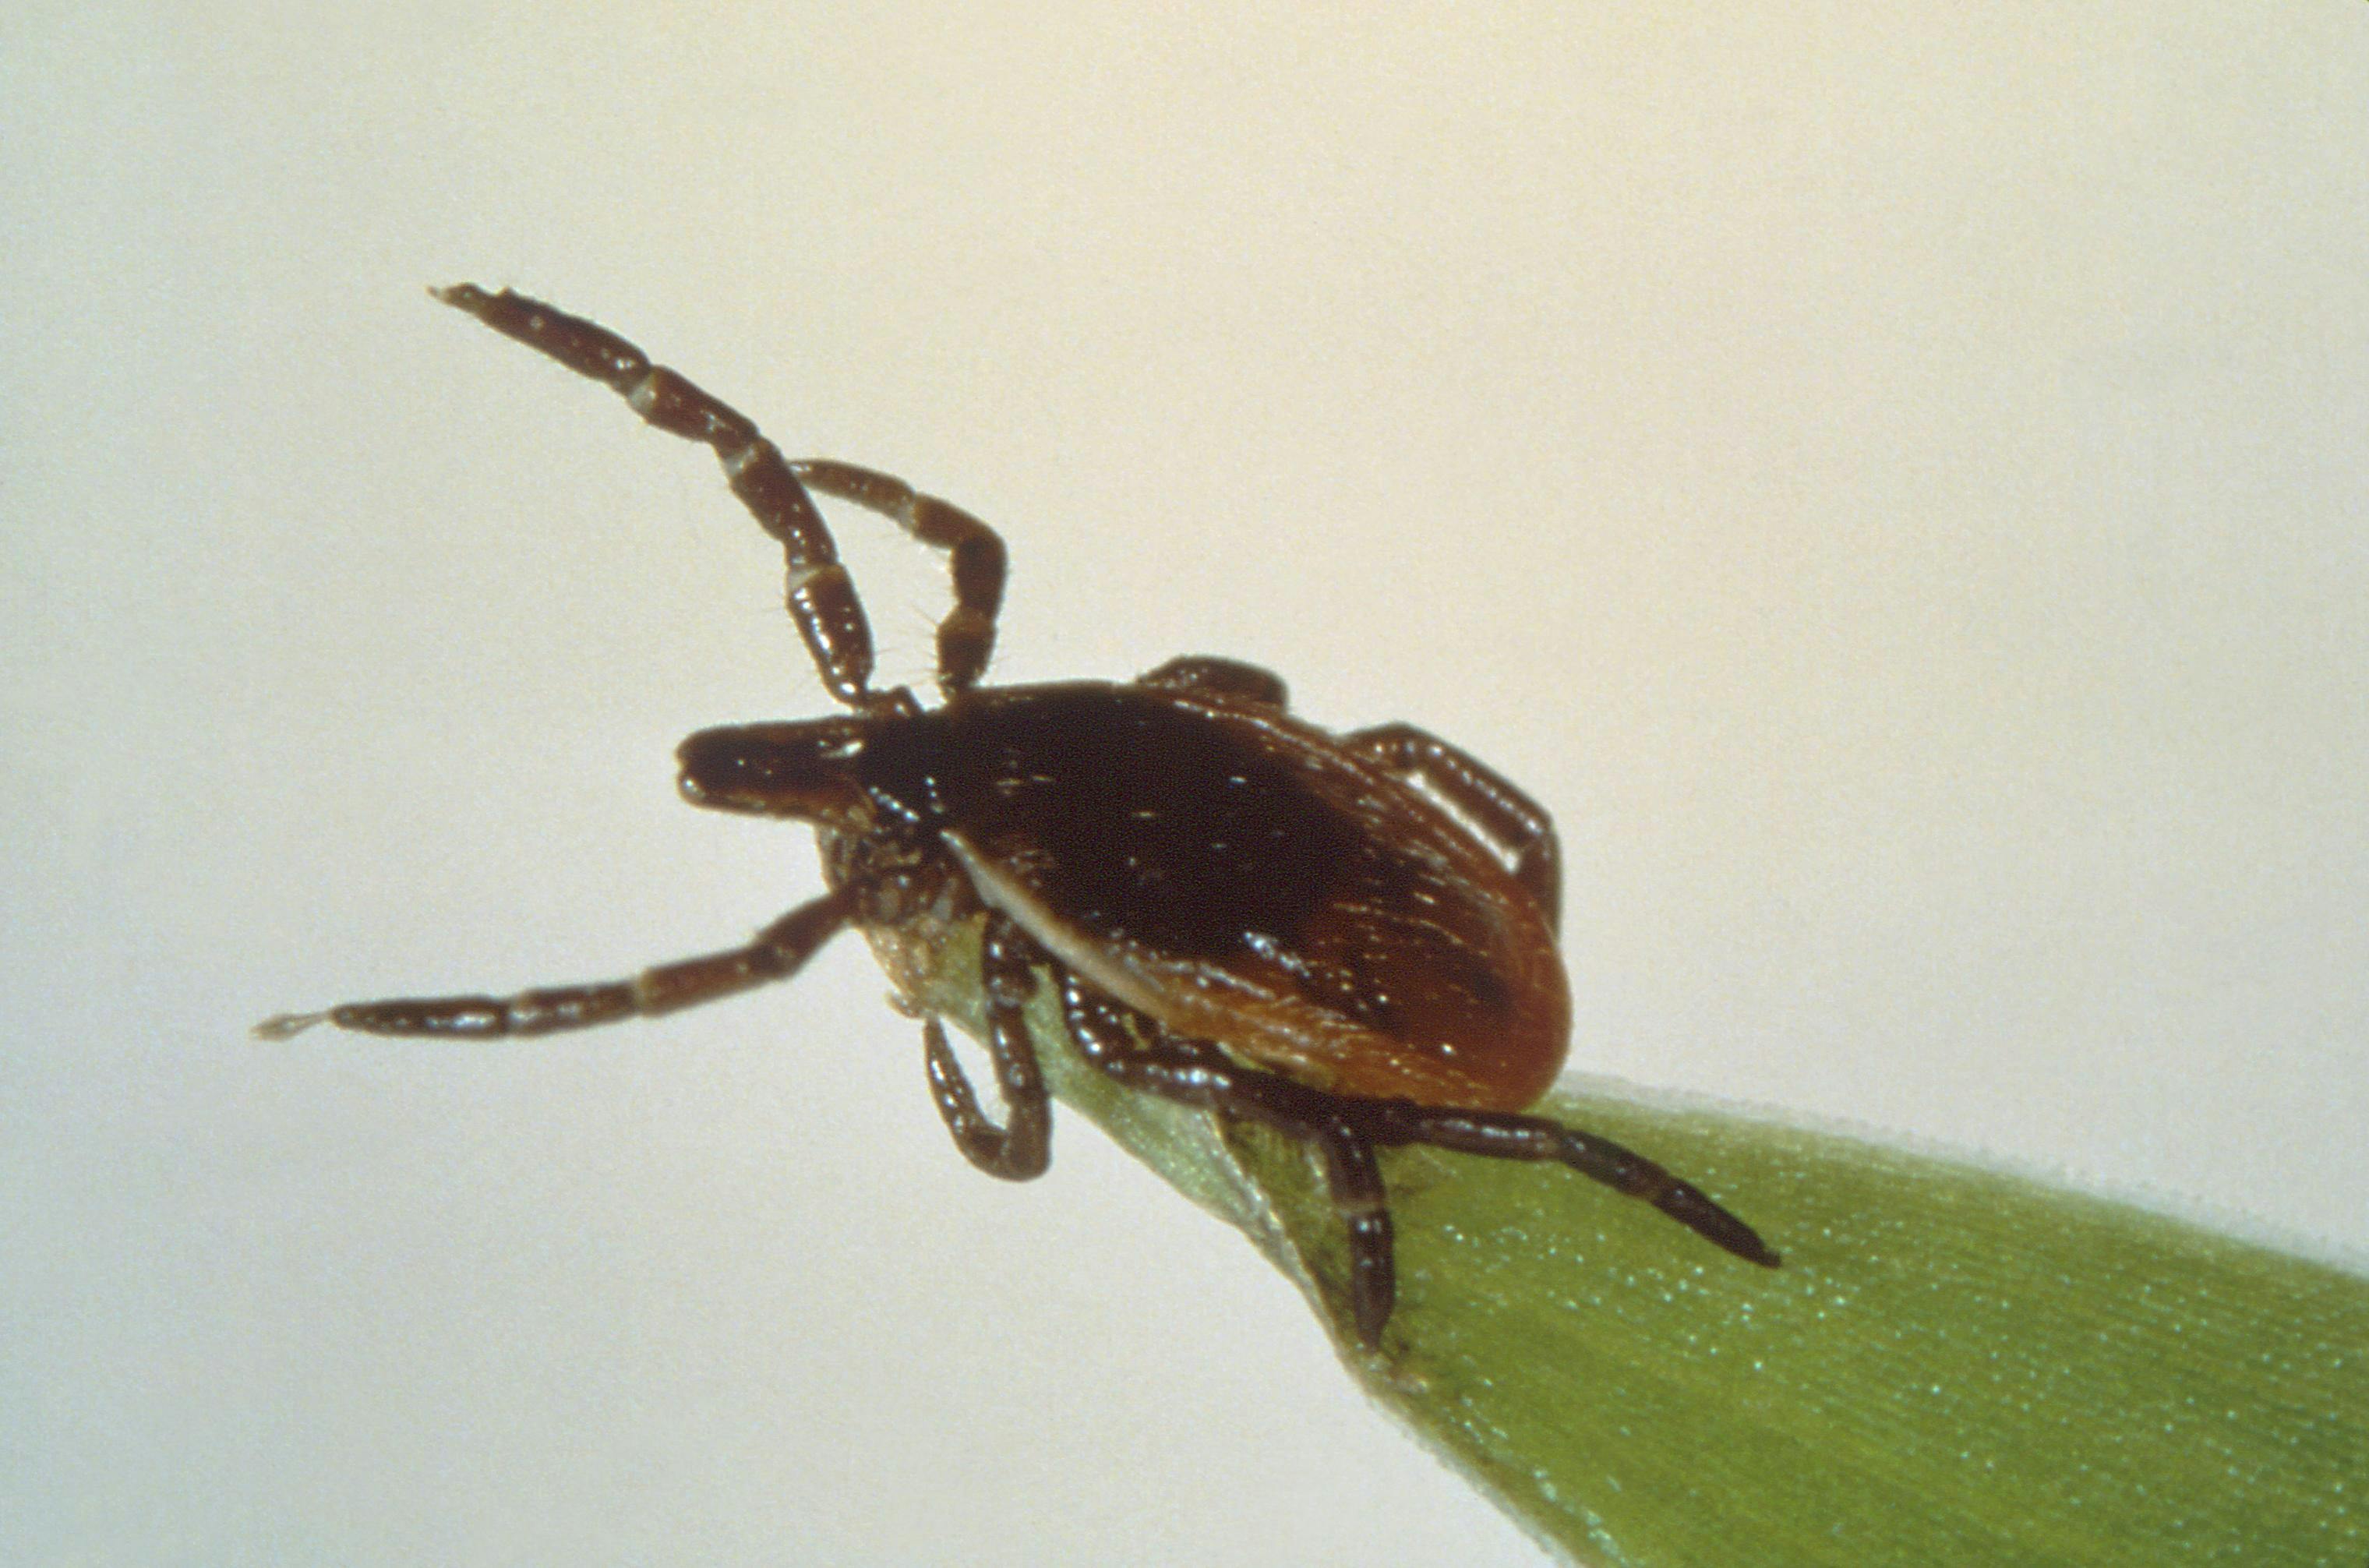 This deer tick, or blacklegged tick, Ixodes scapularis, as it was questing on a blade of grass. The Lyme disease bacterium, Borrelia burgdorferi, is spread through the bite of infected ticks. The blacklegged tick spreads the disease in the northeastern, mid-Atlantic, and northcentral United States, while the western blacklegged tick, Ixodes pacificus, spreads the disease on the Pacific Coast. Photo credit: CDC